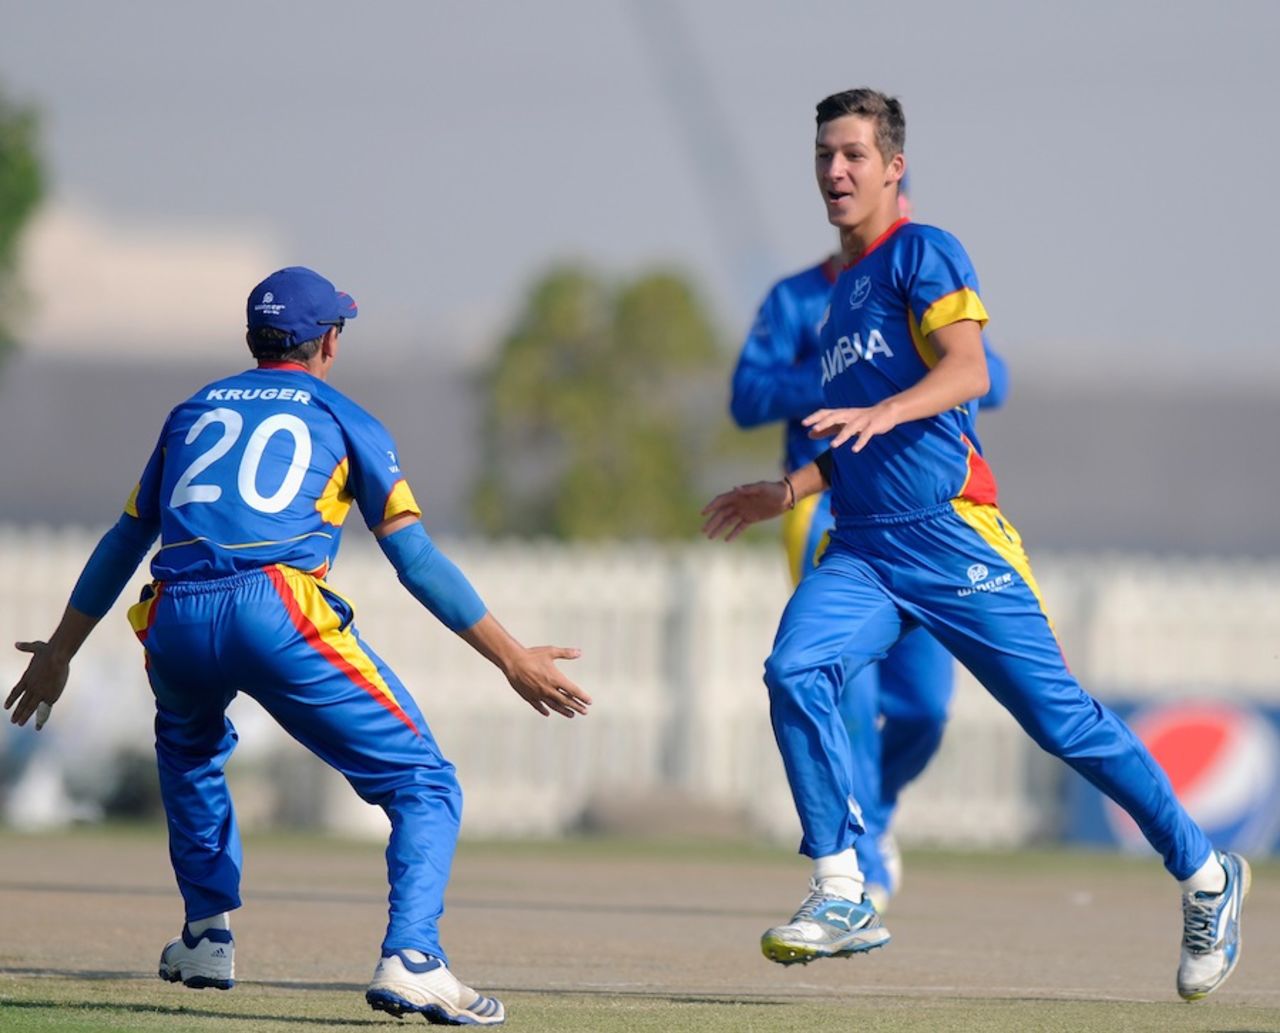 JJ Smit exults after taking a wicket, Australia v Namibia, Under-19 World Cup, Group B, Abu Dhabi, February 15, 2014